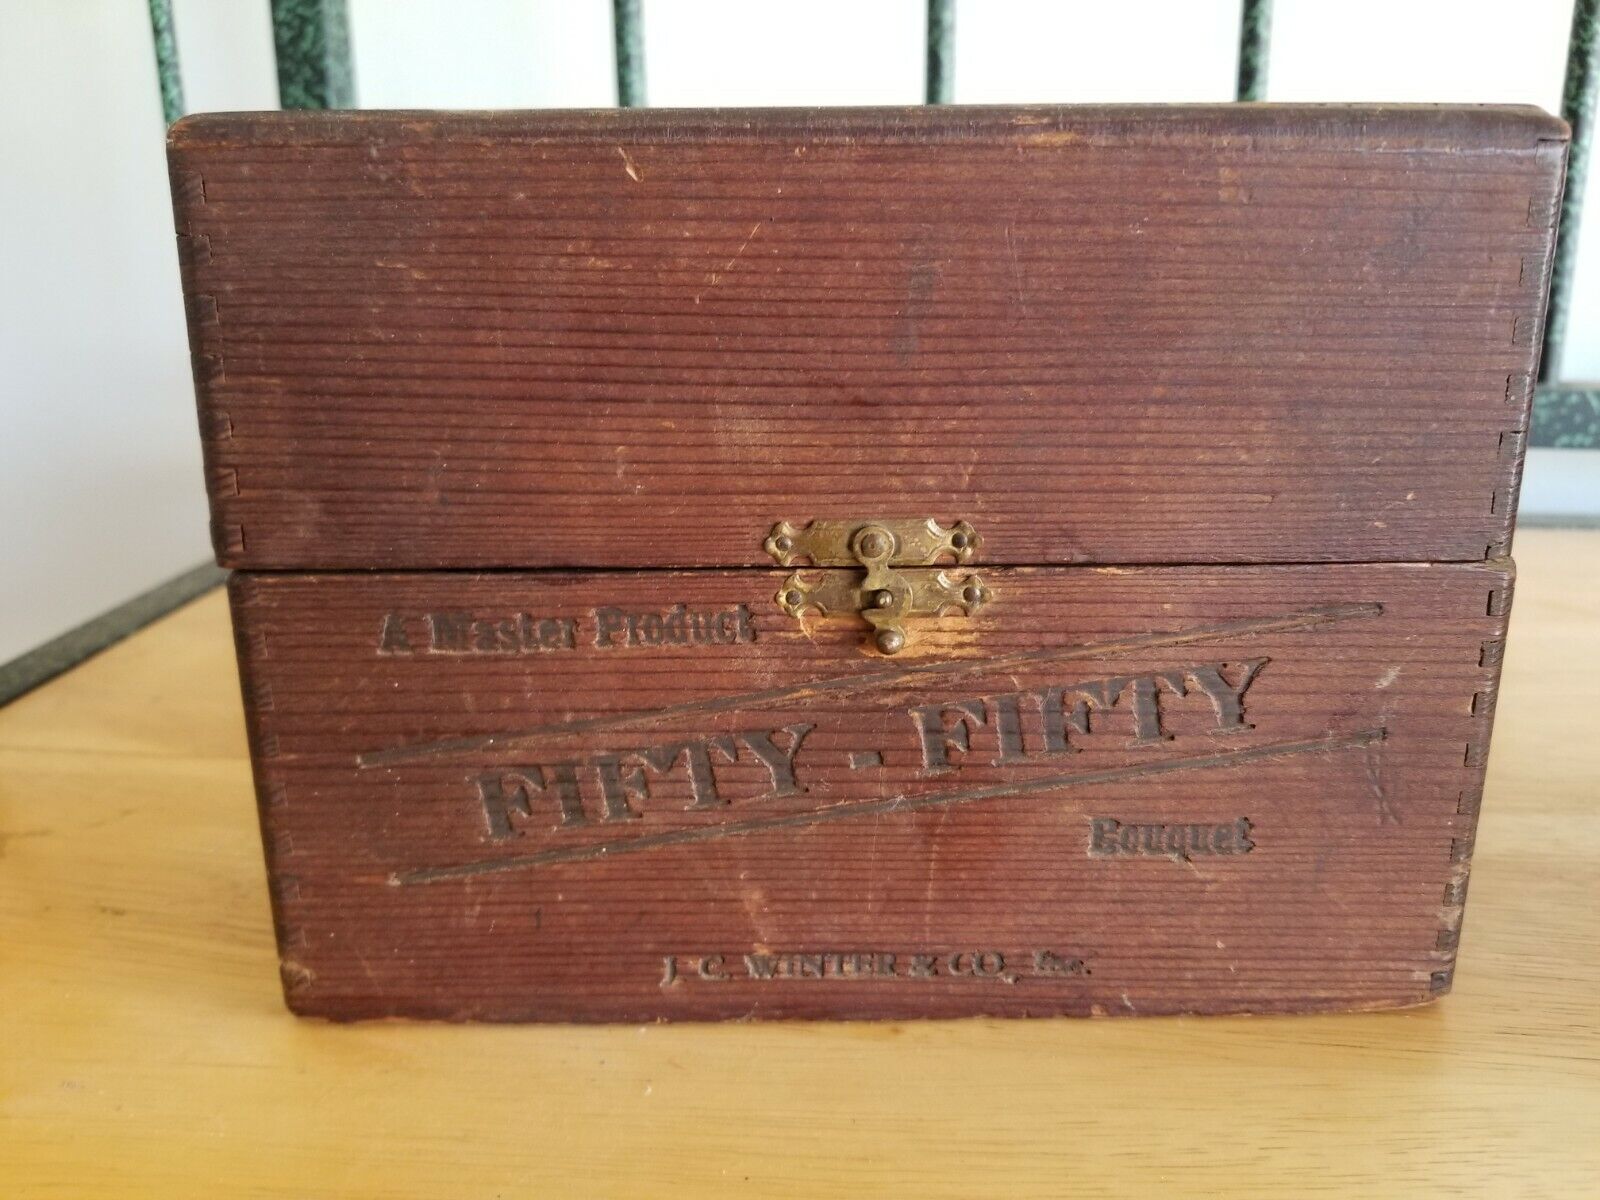 ANTIQUE 5 CENT CIGAR FIFTY-FIFTY 50-50 DOVE TAILED JOINTED WOOD CIGAR BOX HAVANA